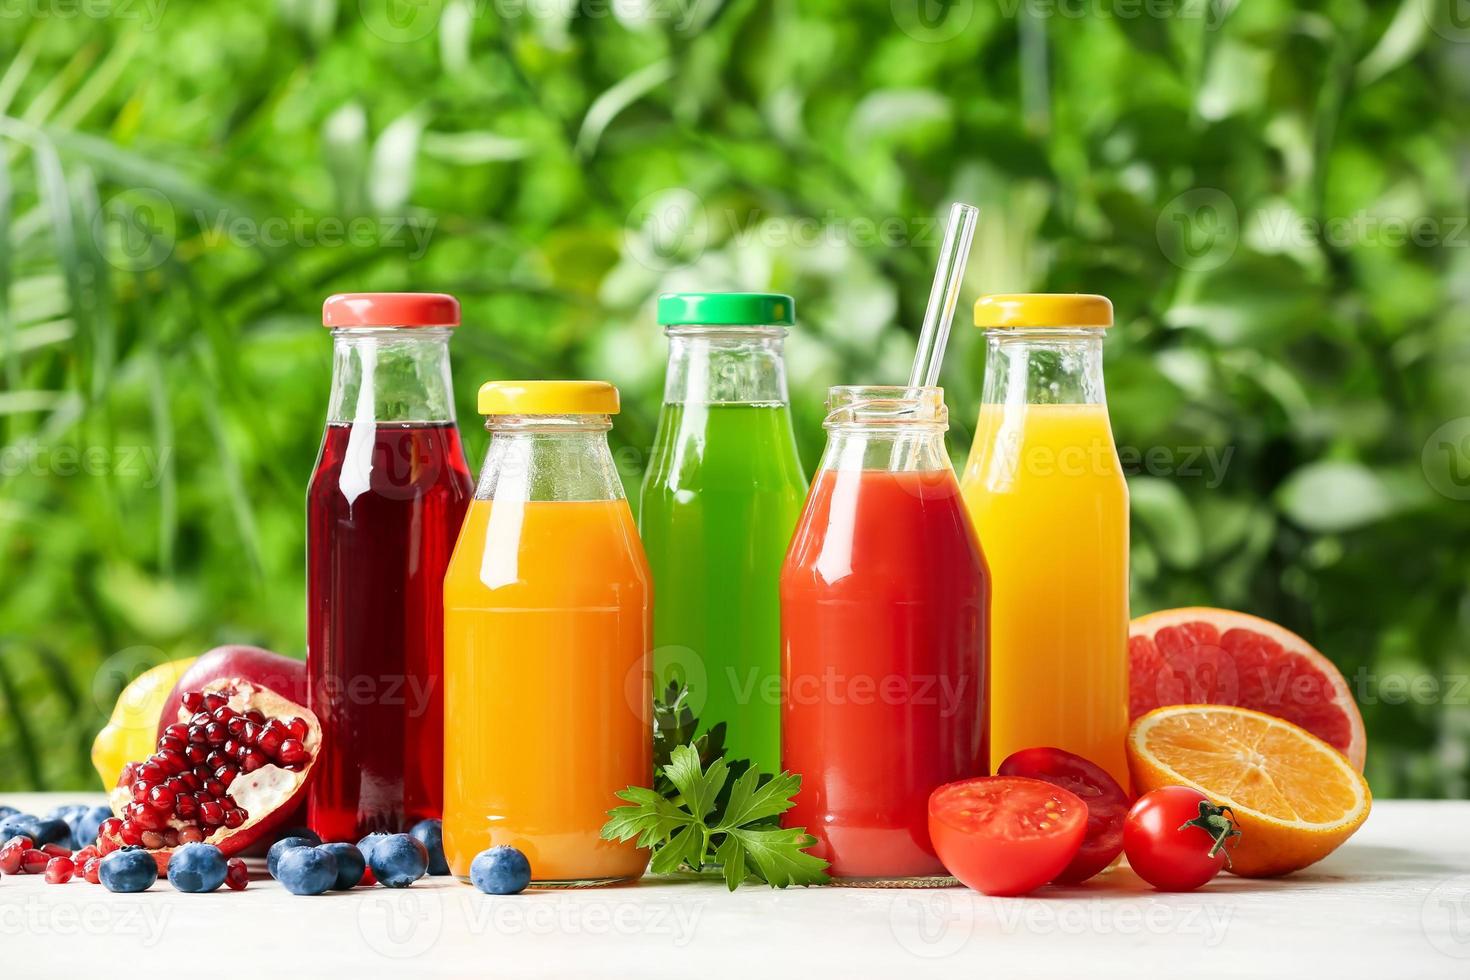 Bottles with healthy juice, fruits and vegetables on table outdoors photo